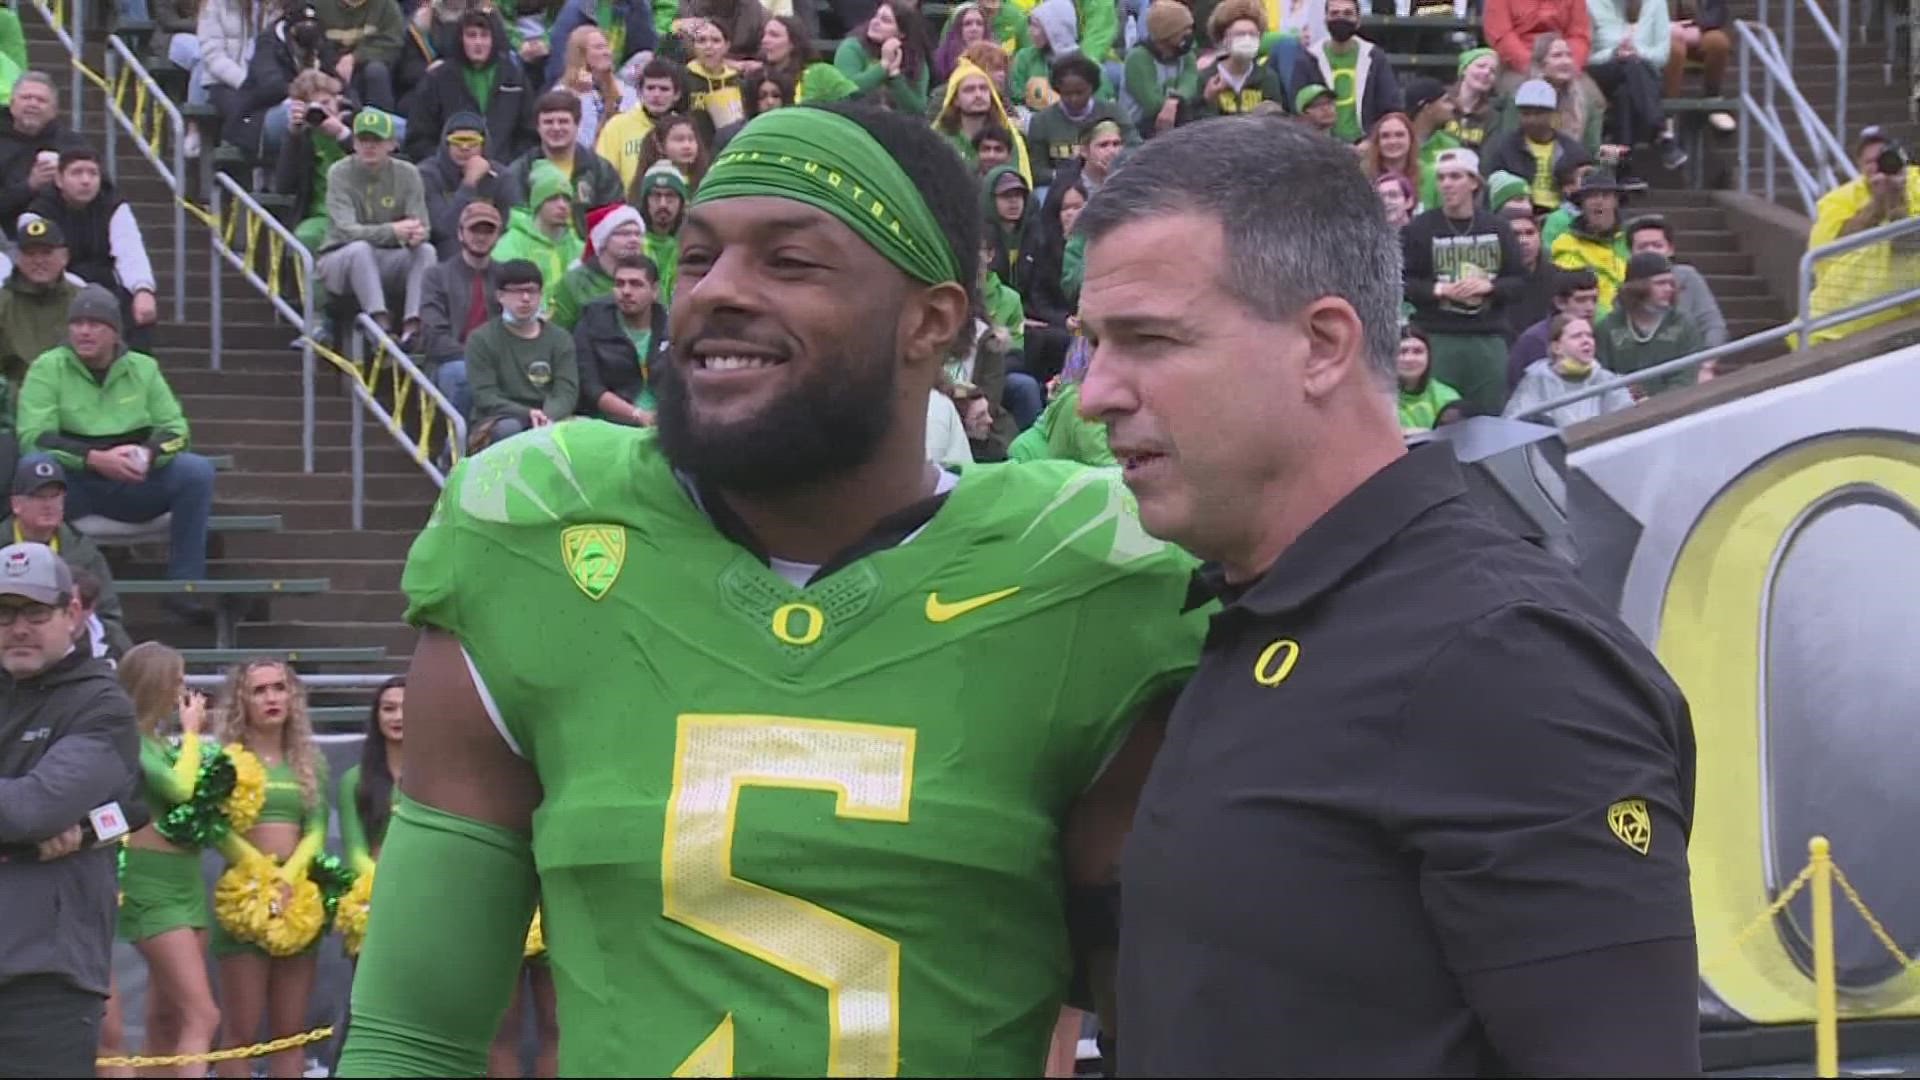 No. 11 Oregon Ducks defeated the Oregon State Beavers 38-29 in Saturday's rivalry game at Autzen Stadium. KGW's Orlando Sanchez reports live from the game.